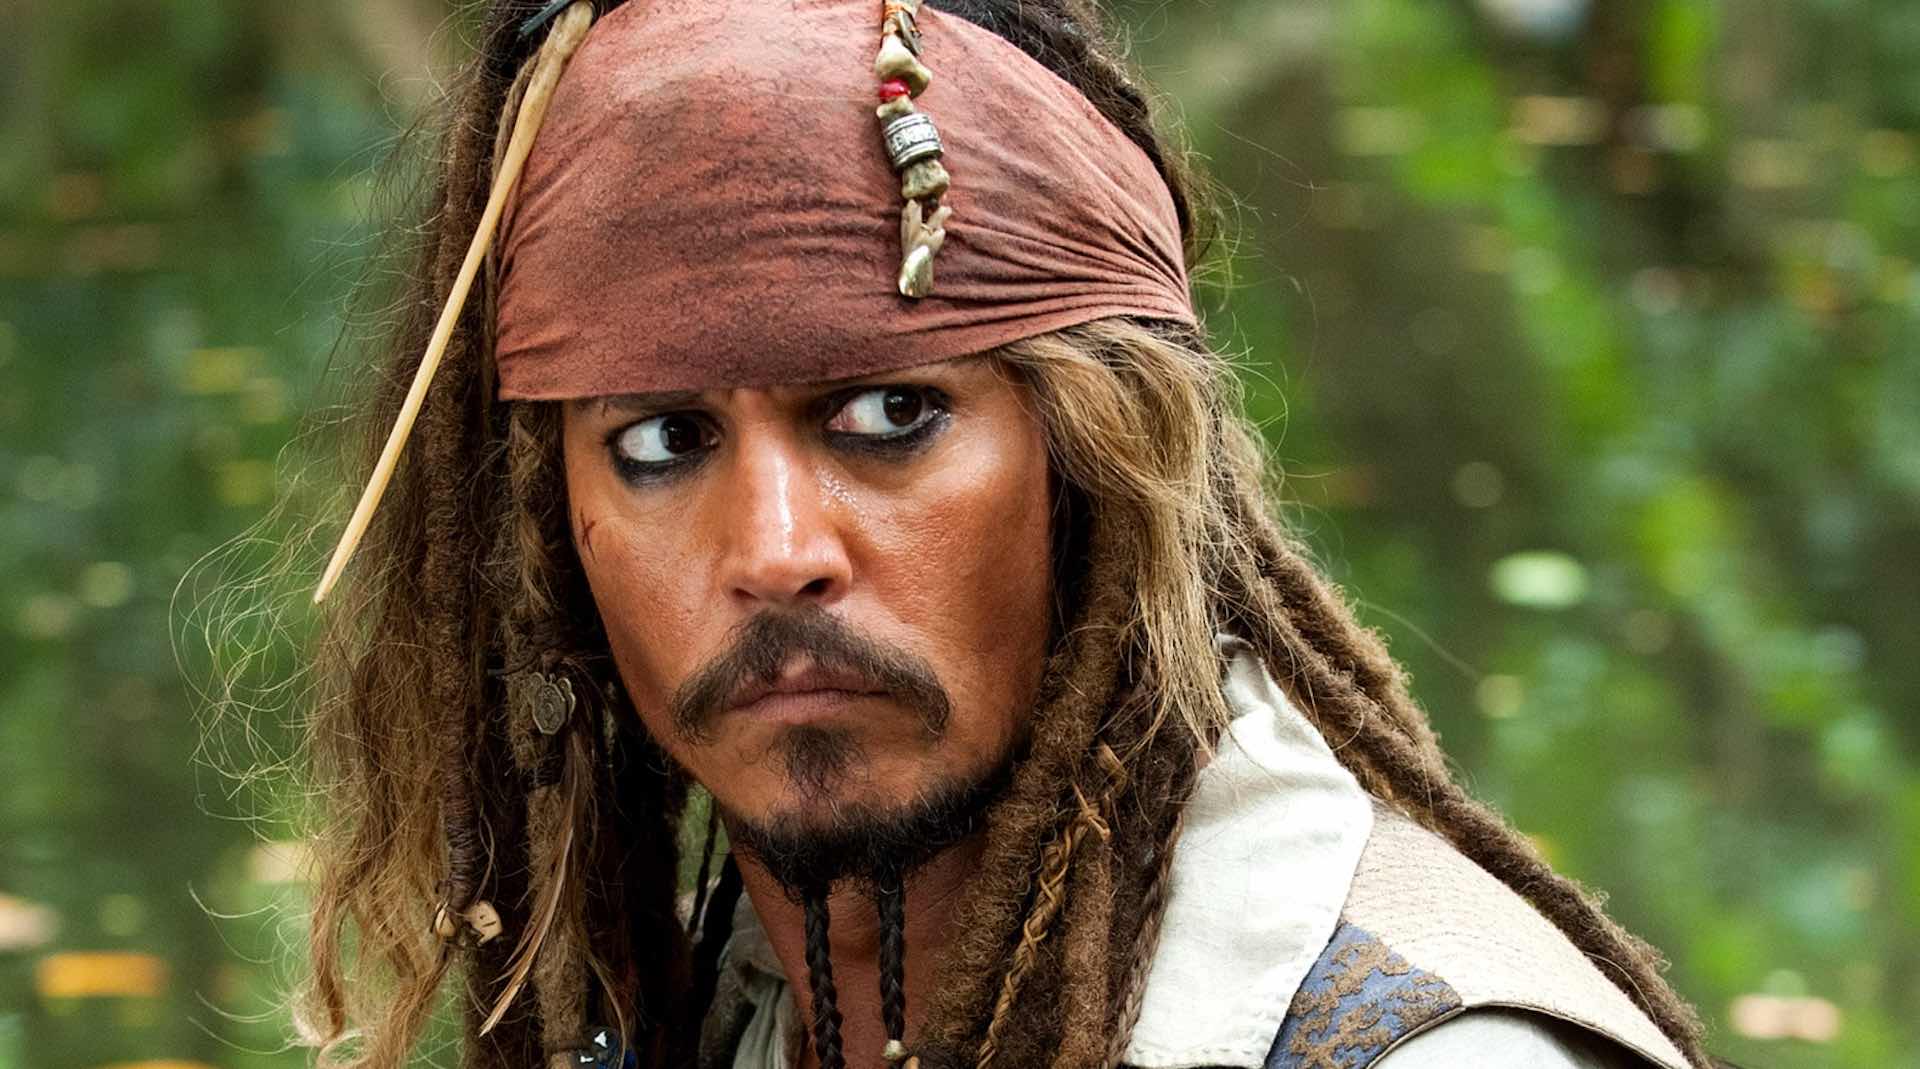 Disney reportedly offered Johnny Depp $300 million to return as Jack Sparrow